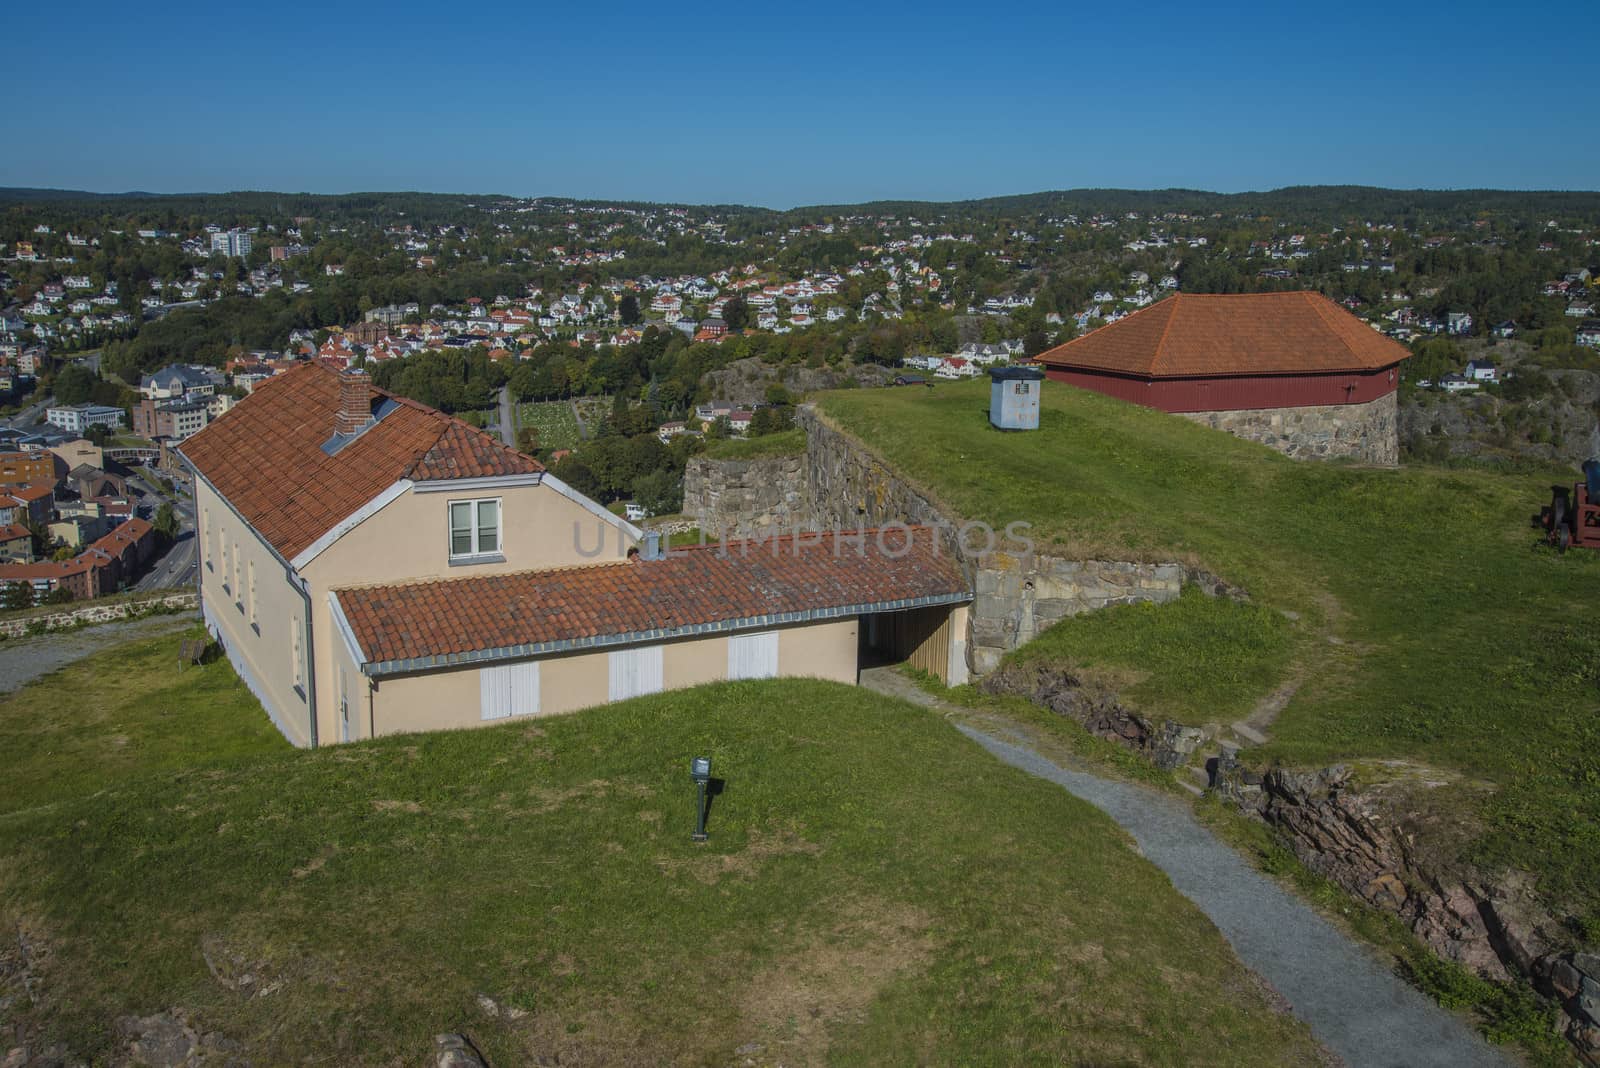 Laboratory building is located on Huths battery and built in 1828. The image is shot at Fredriksten fortress in Halden, Norway September 2013.